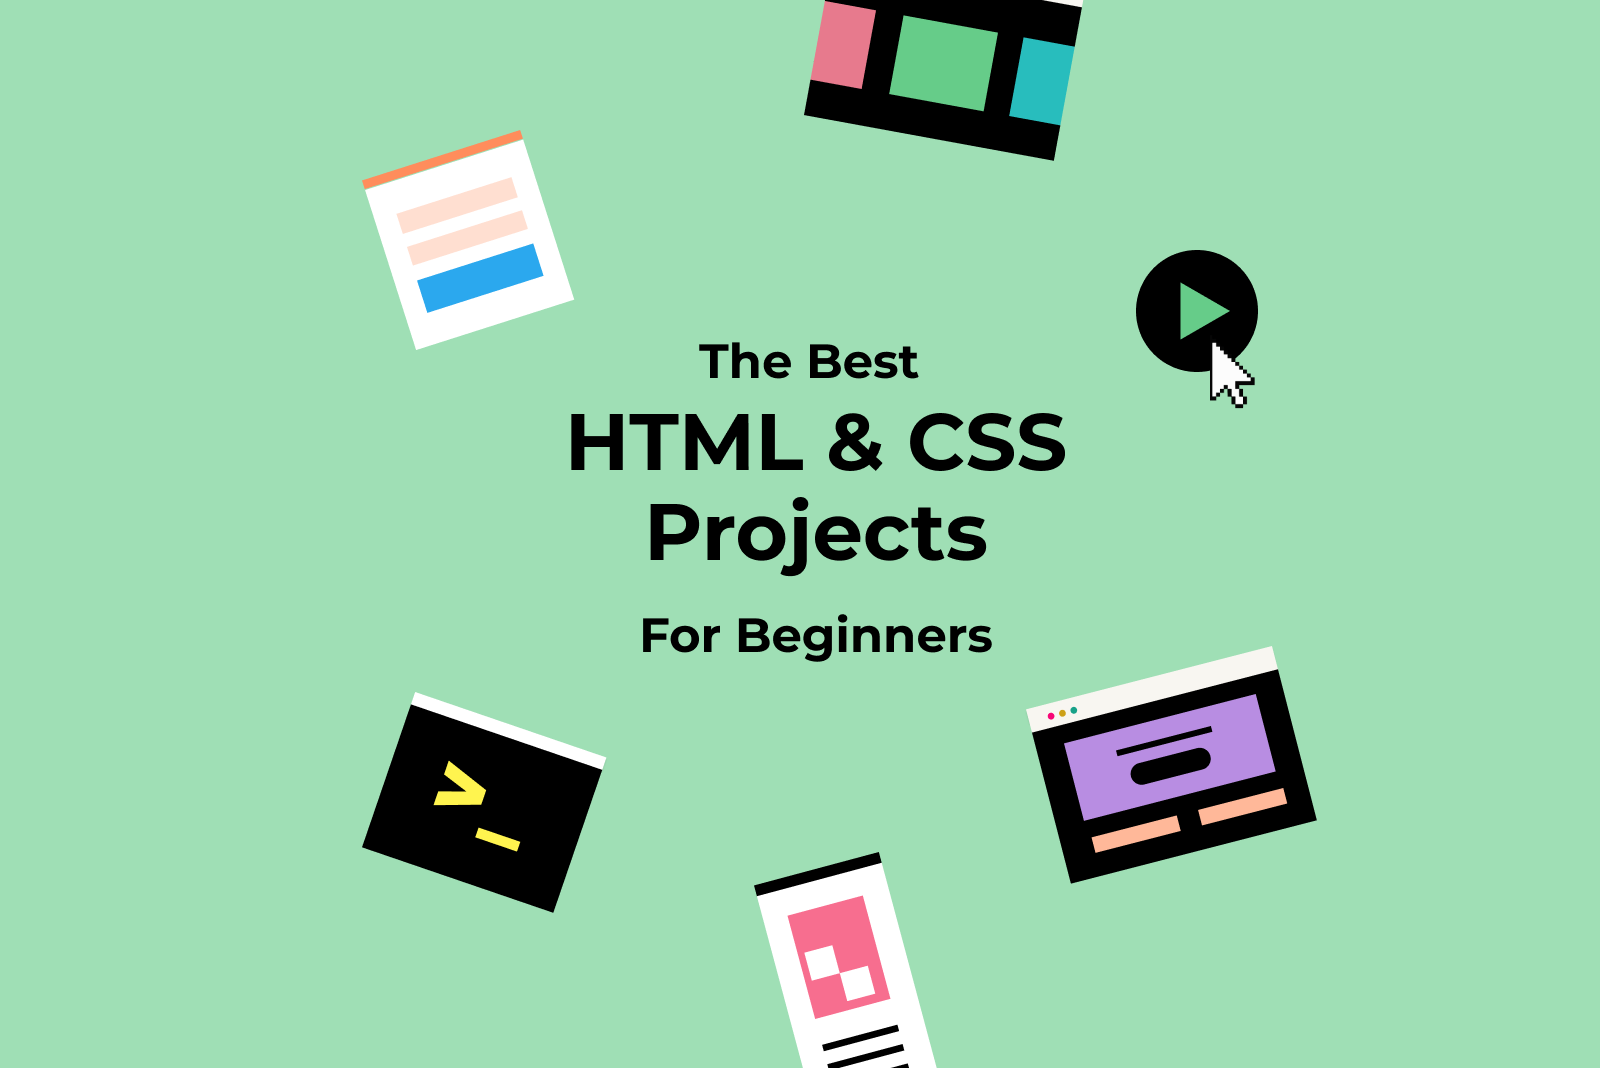 The best HTML & CSS projects for beginners